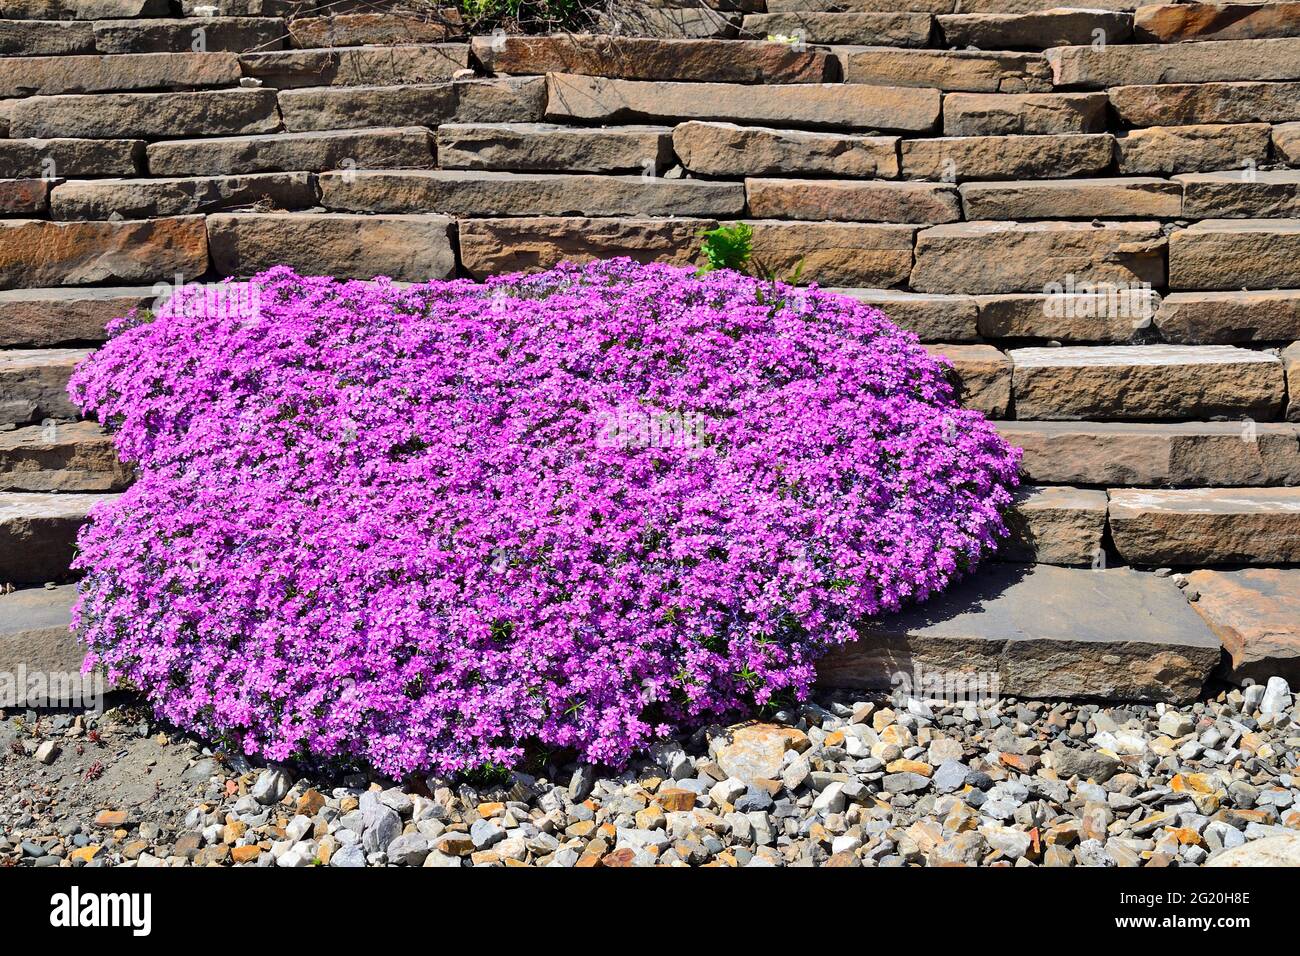 Spring blossoming of pink creeping phlox - Phlox subulata or moss phlox in stony garden. Perennial ground cover blooming plant. Gardening, floricultur Stock Photo